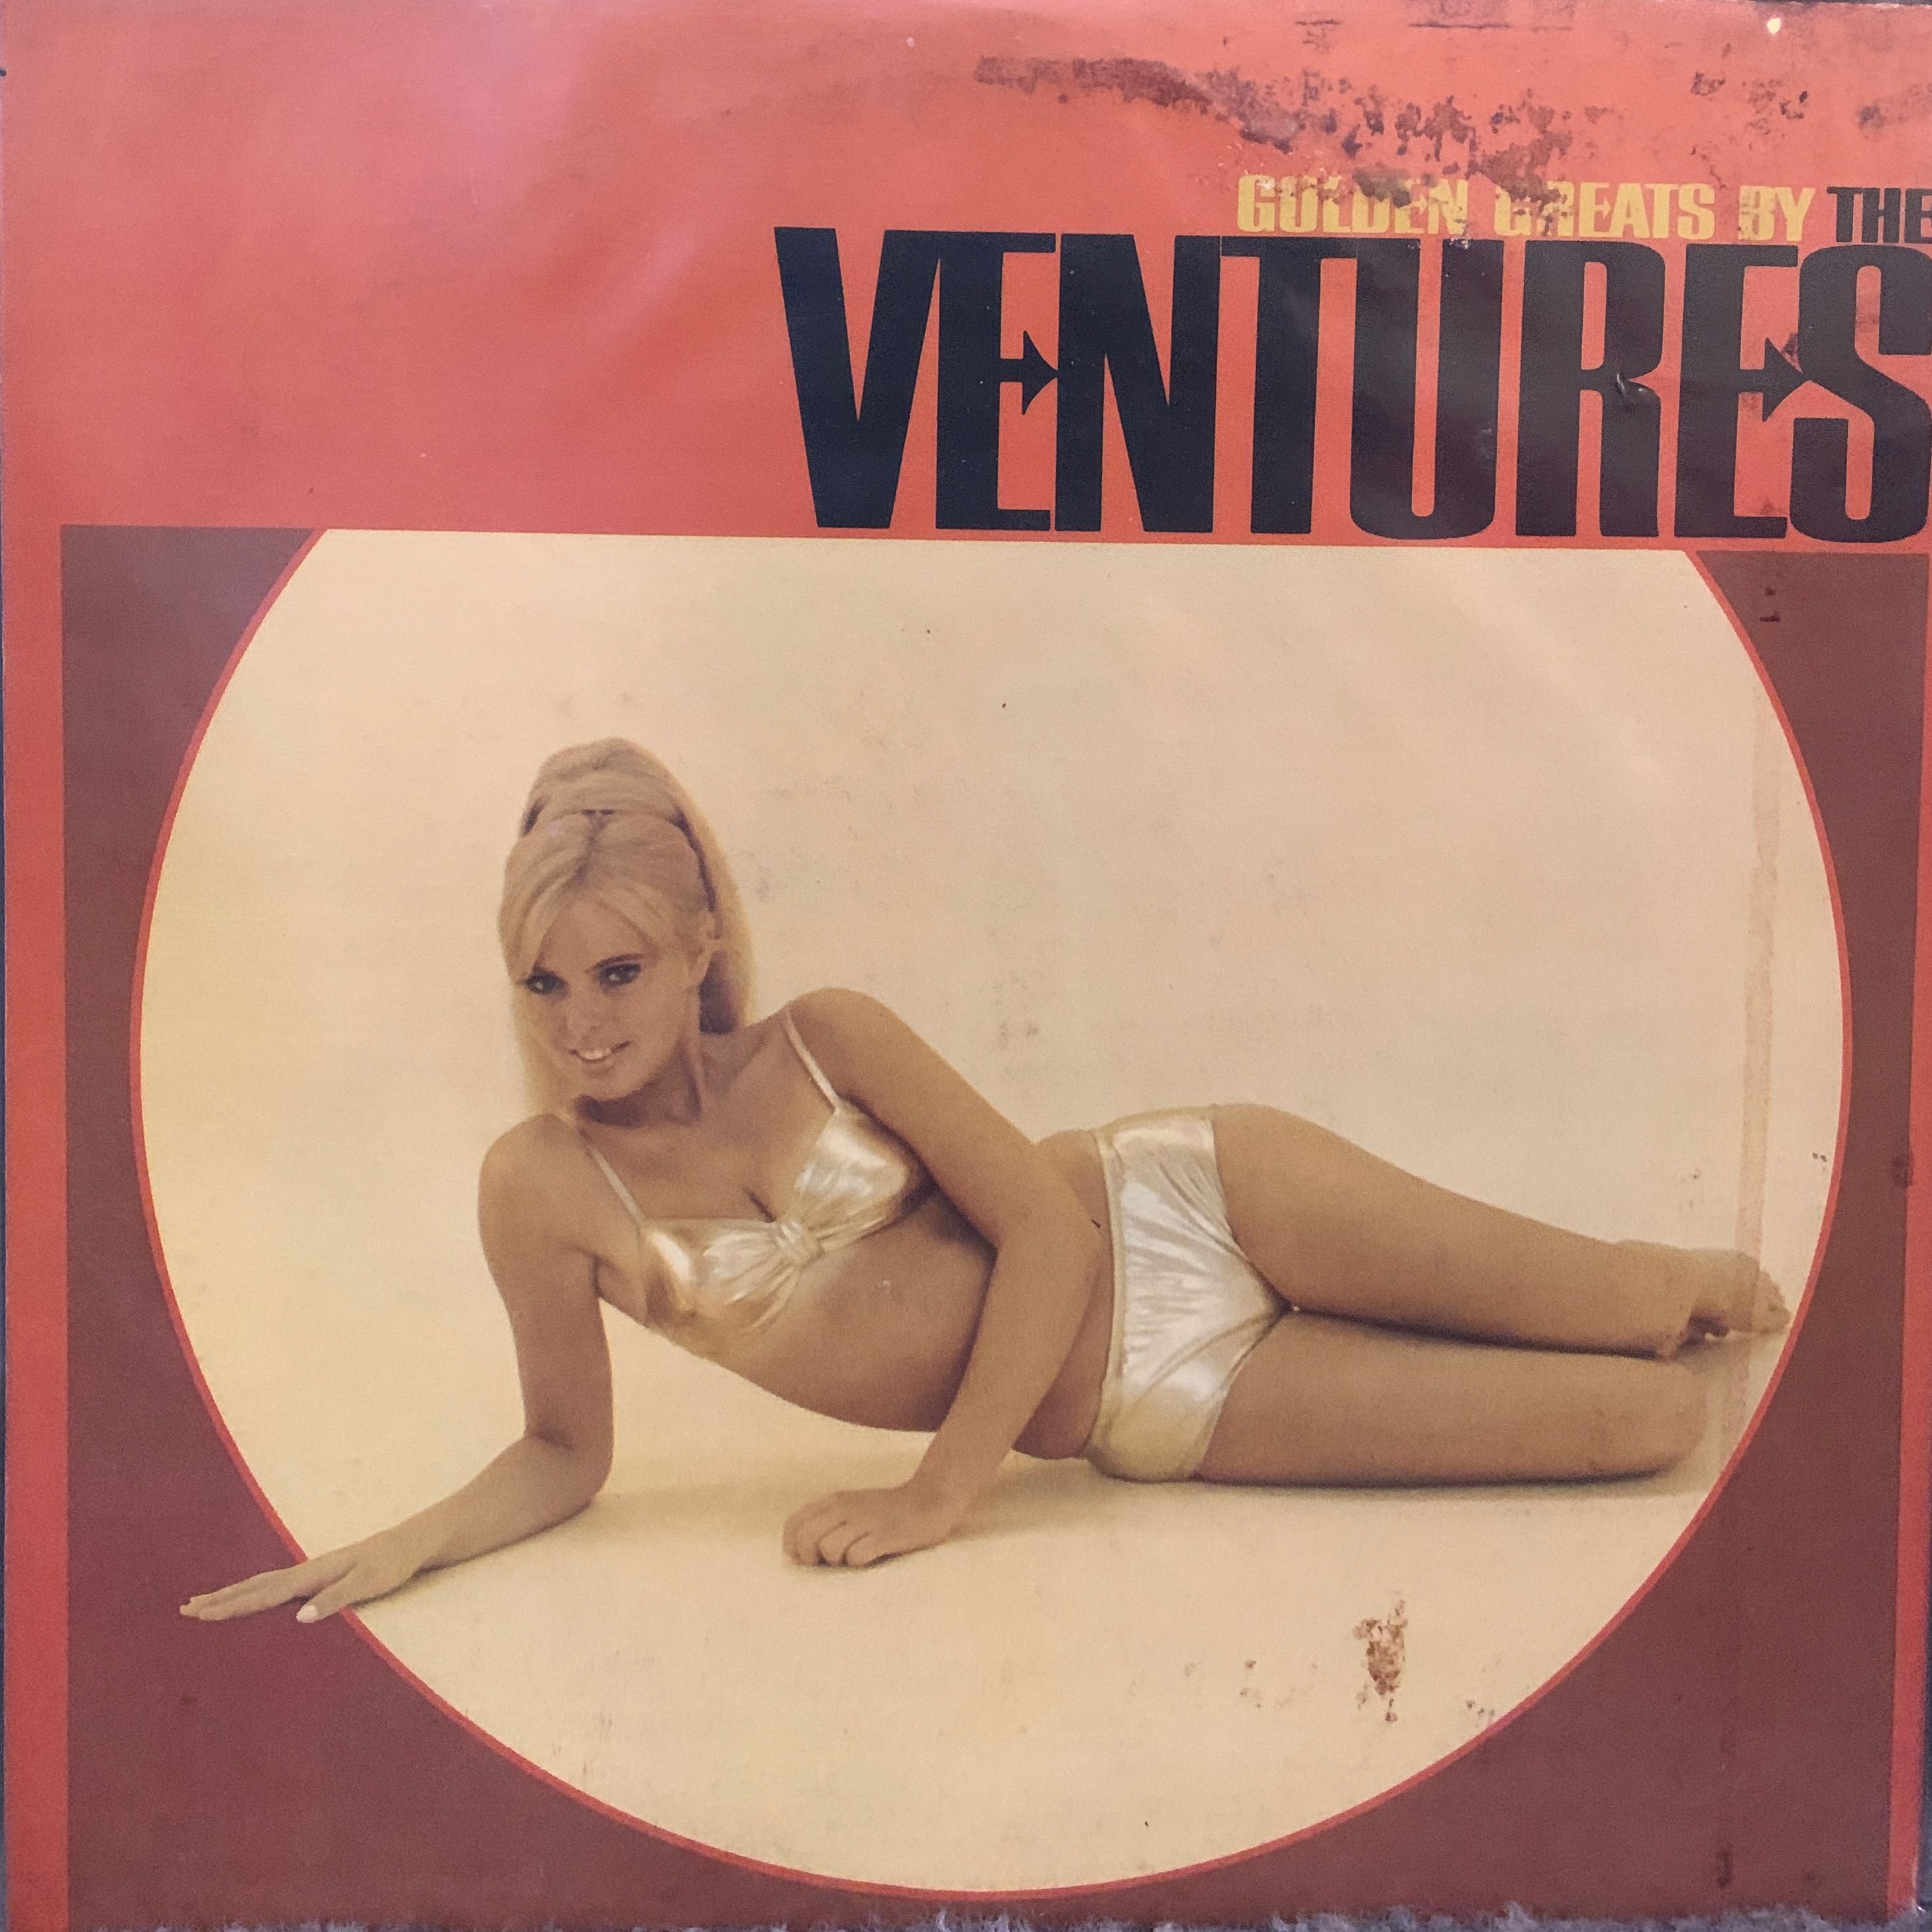 Golden Greats - The Ventures (12”) music collectible - Main Image 2